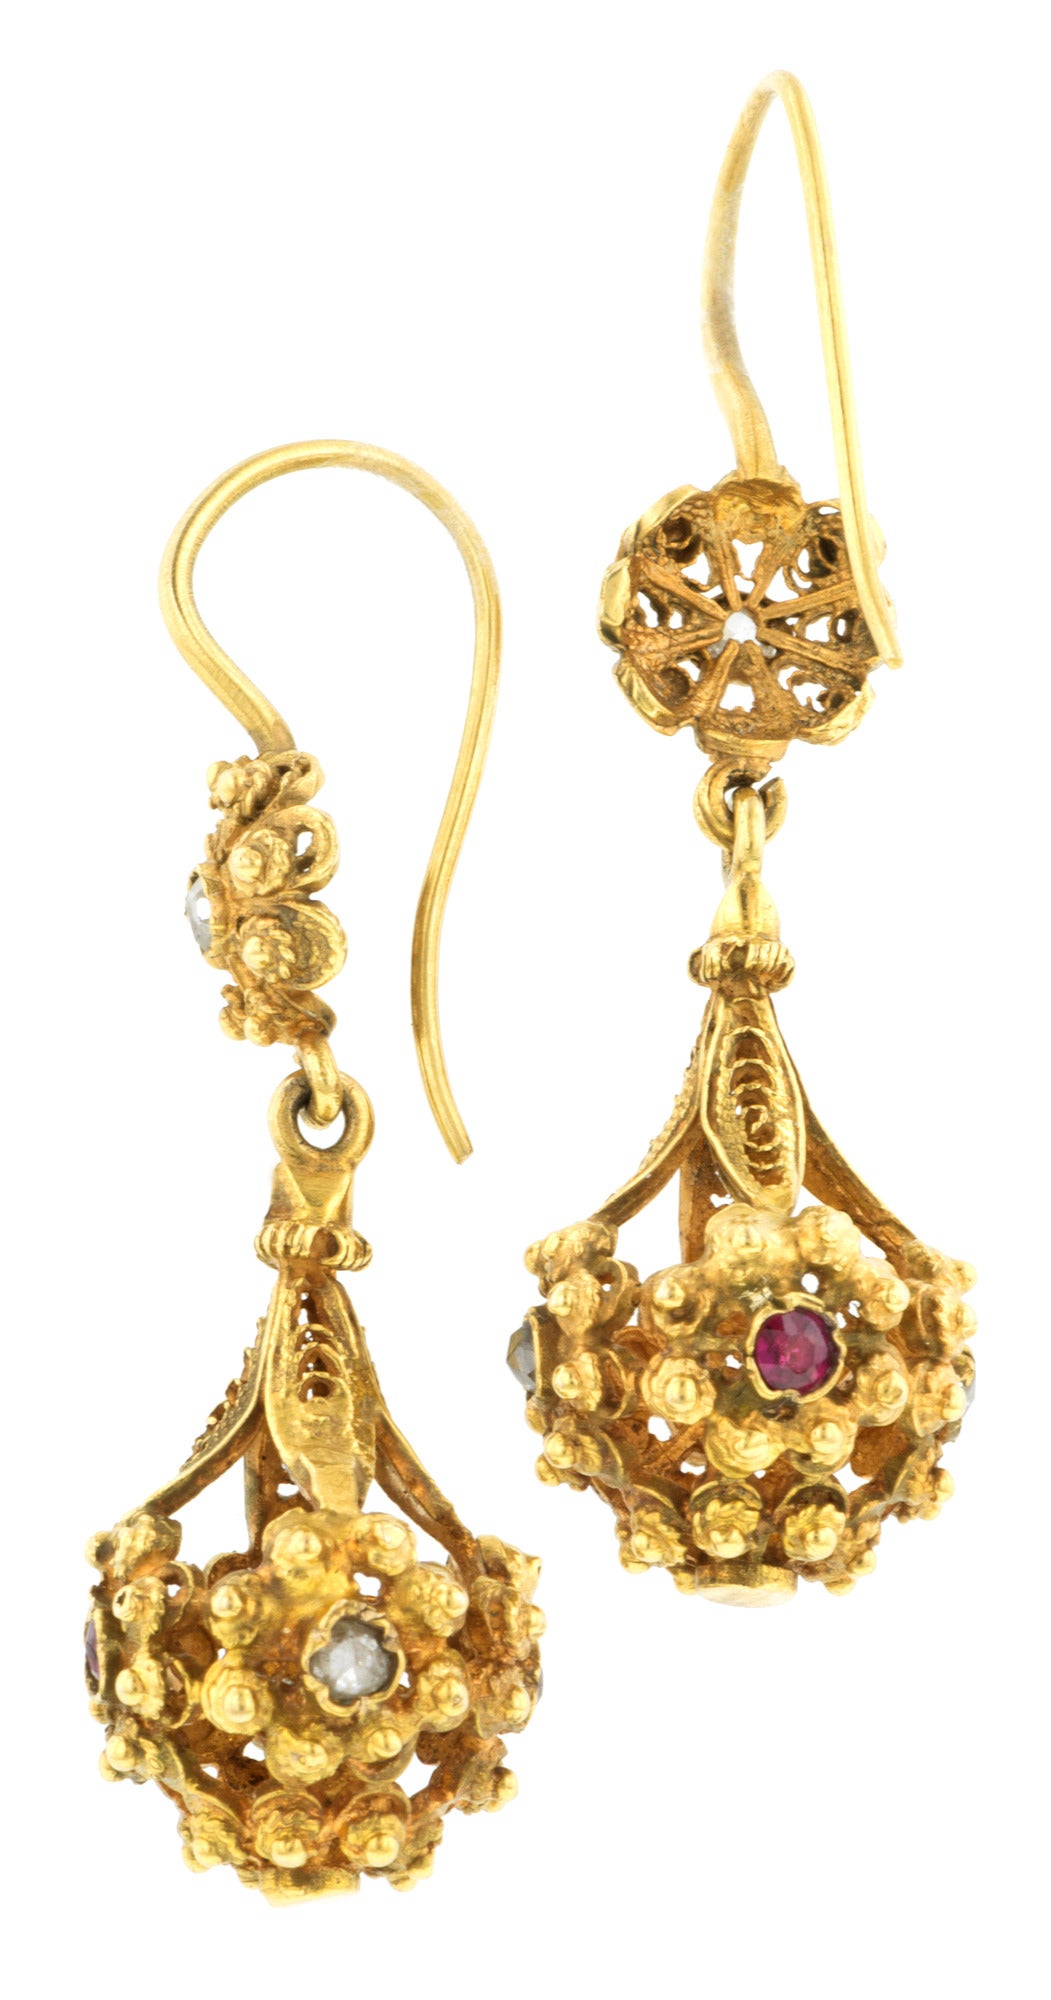 Victorian Ruby & Diamond Drop Earrings set with rubies and Rose cut diamonds, both measuring app. 2.0mm, in an open work, flower cluster drop, fashioned in 18k gold. Circa 1890. Length 1 5/8 inches.